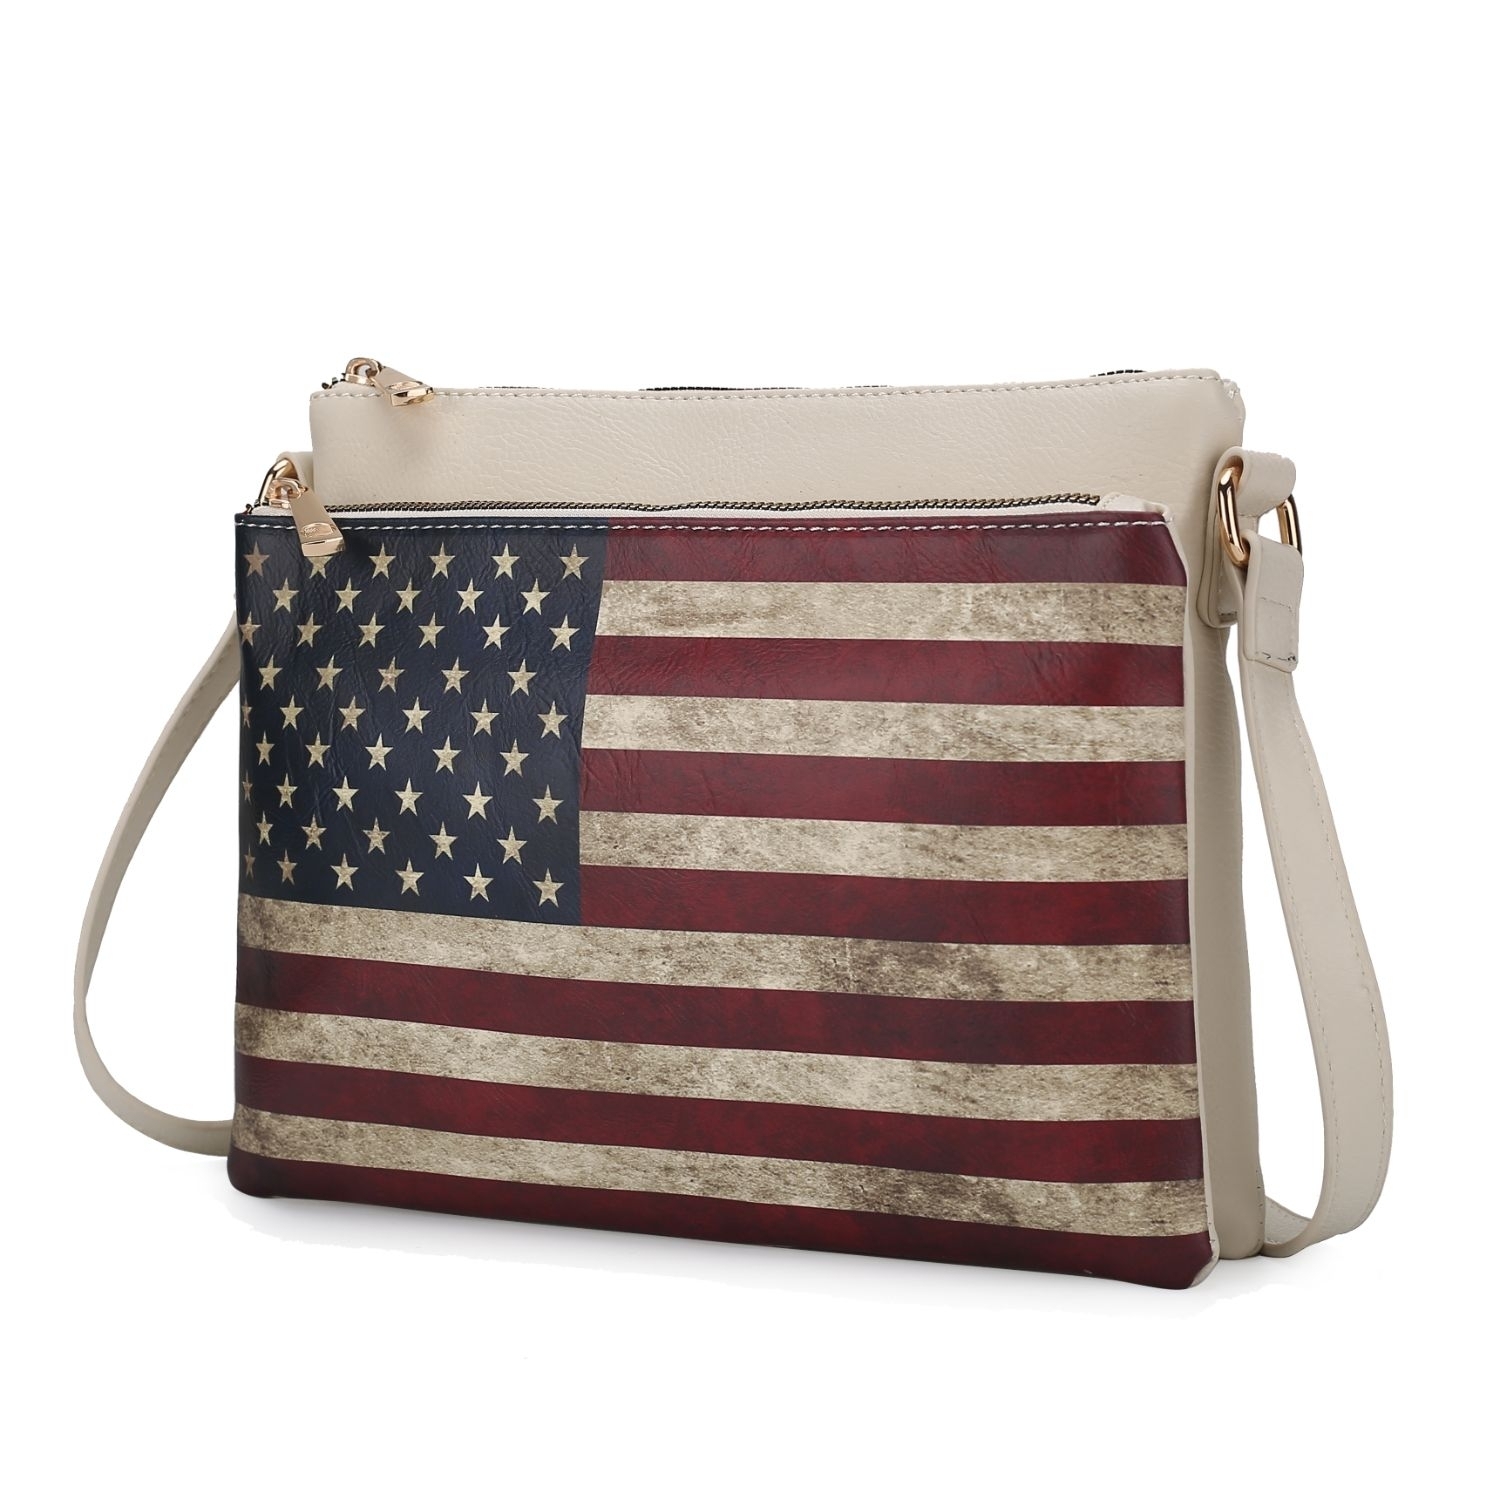 MKF Collection Madeline Printed Flag Vegan Leather Women's Crossbody Bag By Mia K - Beige